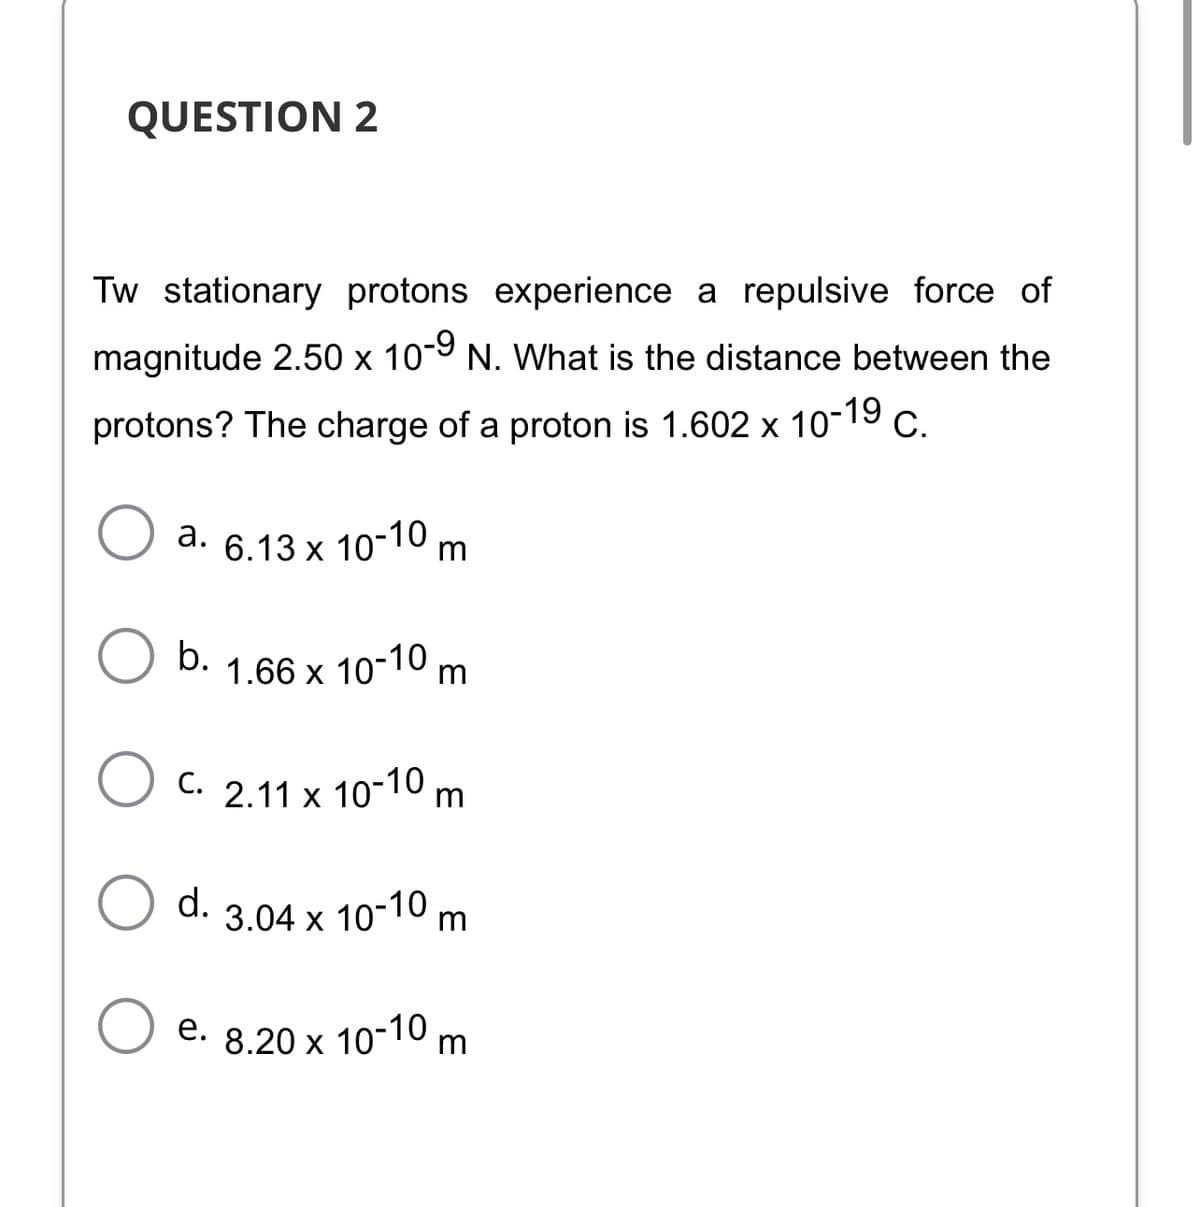 QUESTION 2
Tw stationary protons experience a repulsive force of
magnitude 2.50 x 10-9 N. What is the distance between the
protons? The charge of a proton is 1.602 x 10-19
С.
a. 6.13 x 10-10 m
b.
1.66 x 10-10 m
C. 2.11 x 10-10 m.
d.
3.04 x 10-10 m
e. 8.20 x 10-10 m.
